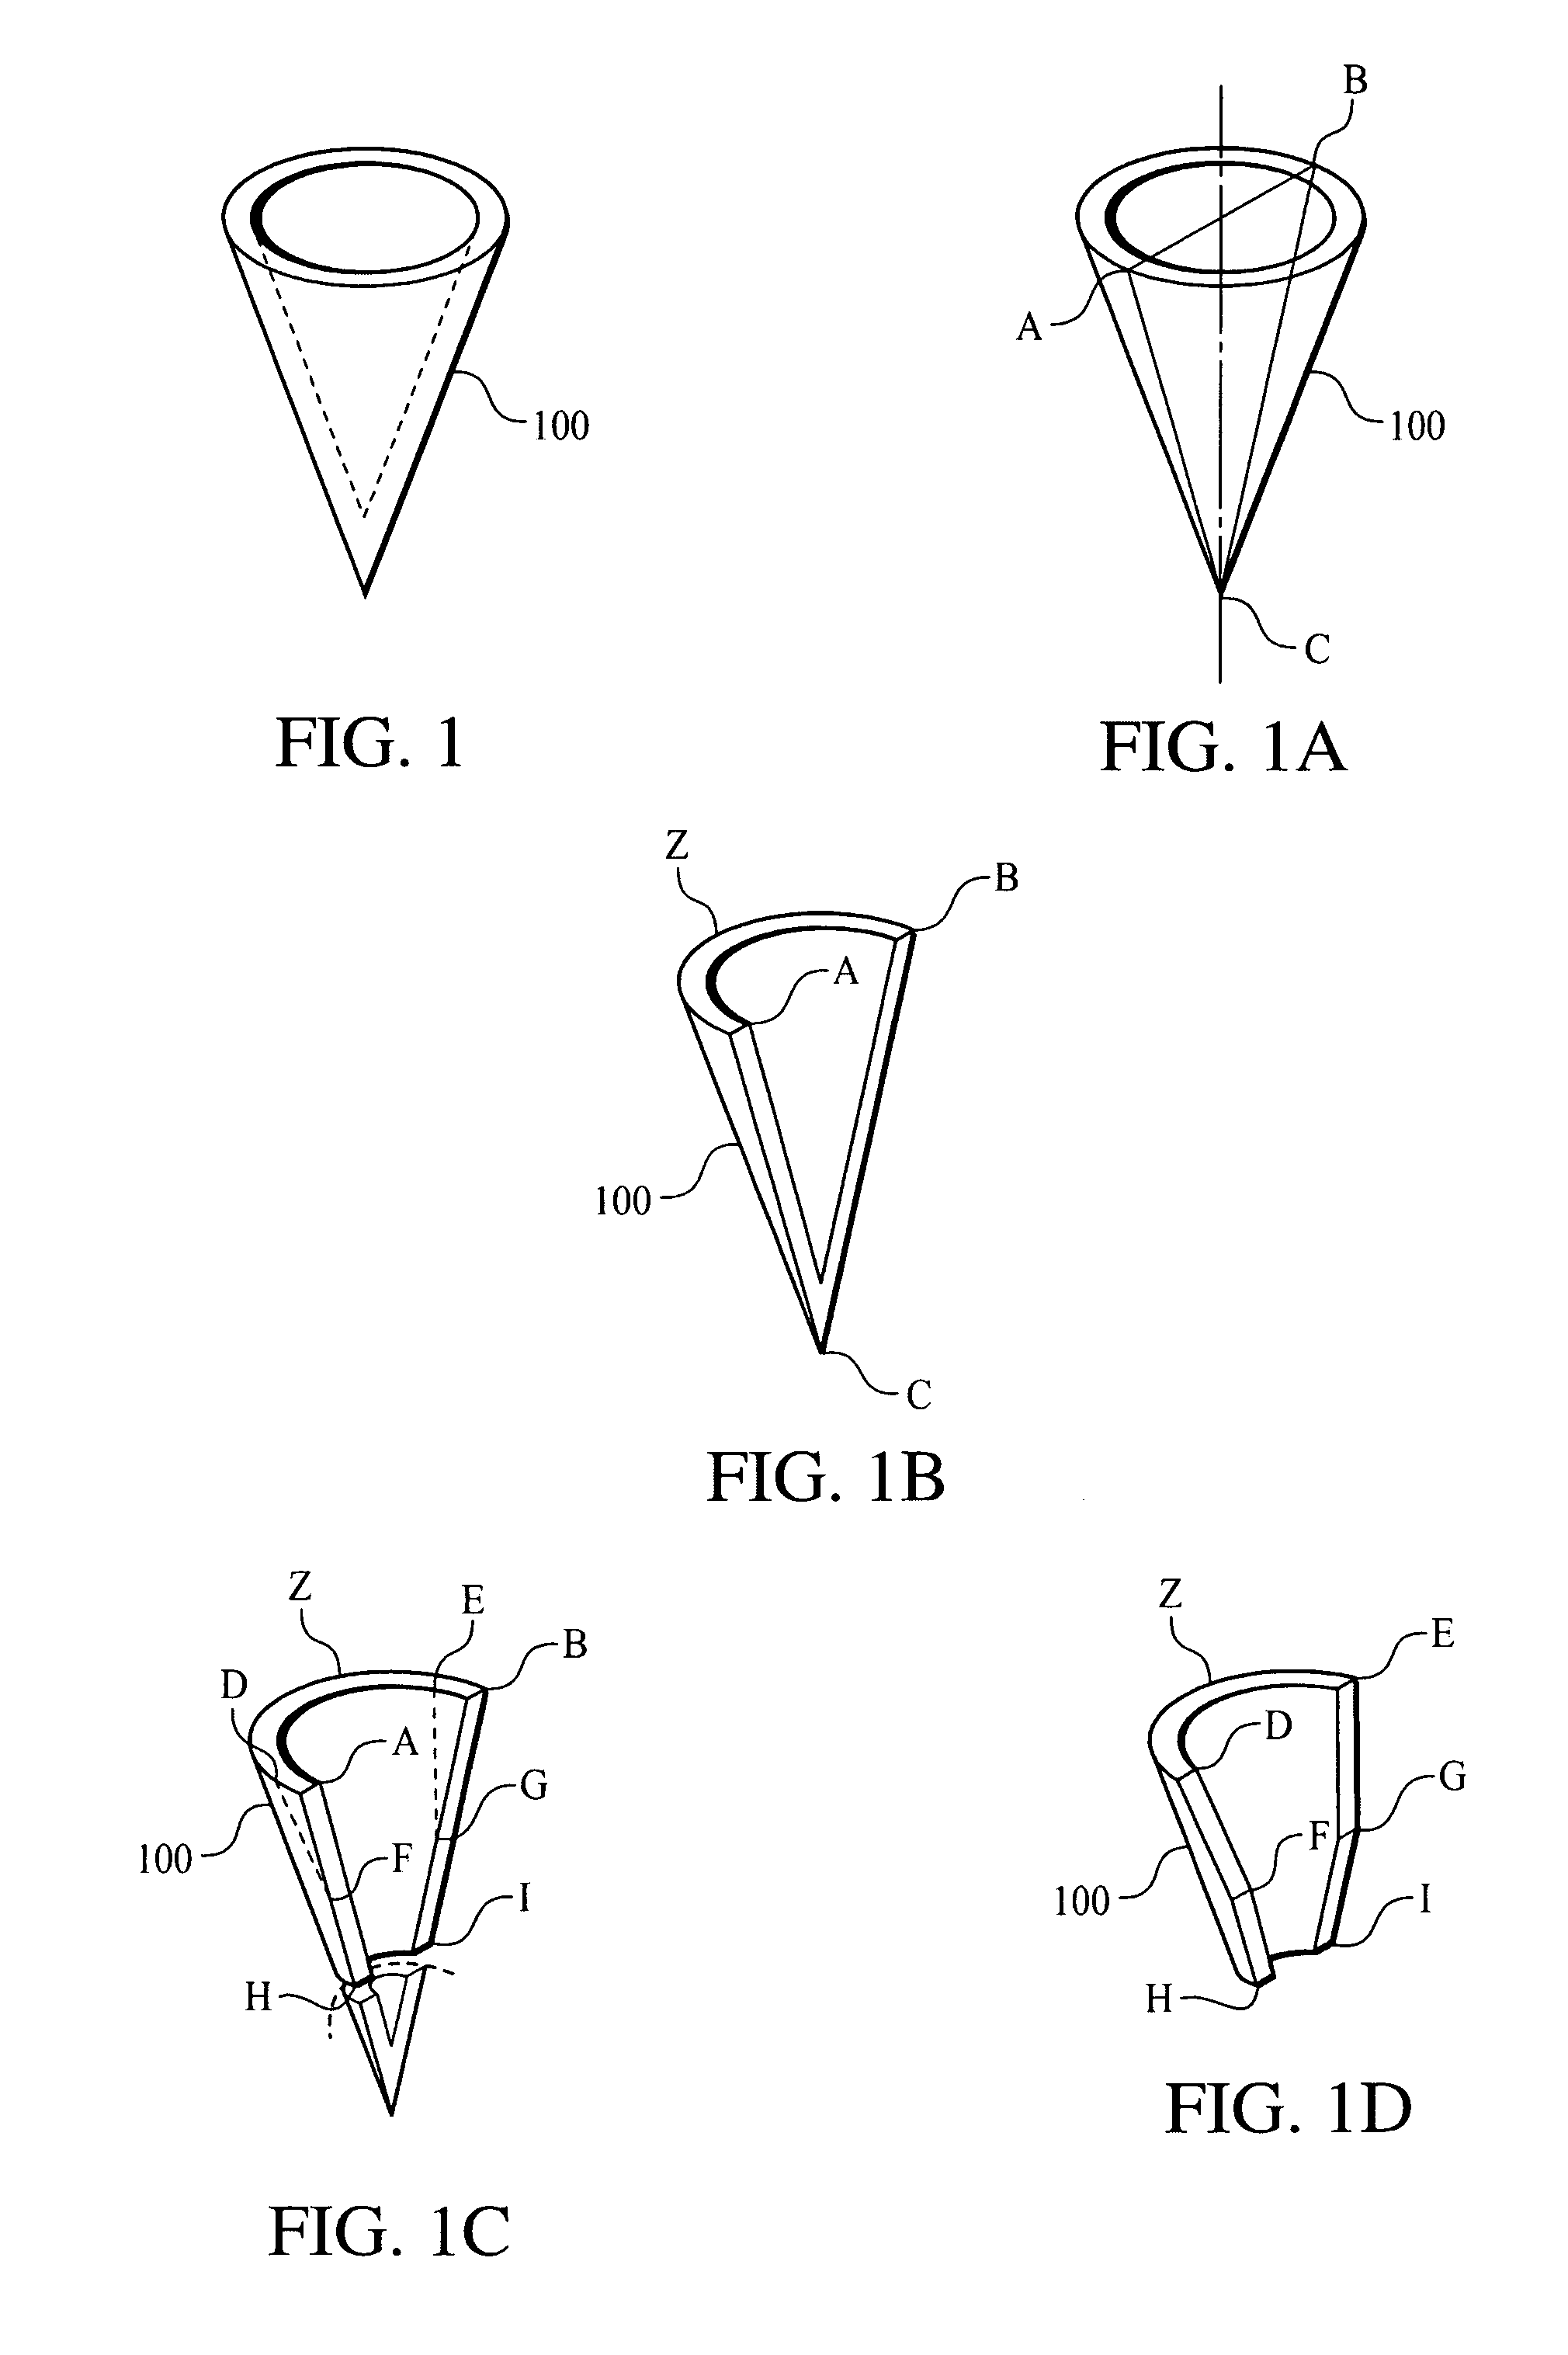 Device for local sub-gingival applications of dental medications